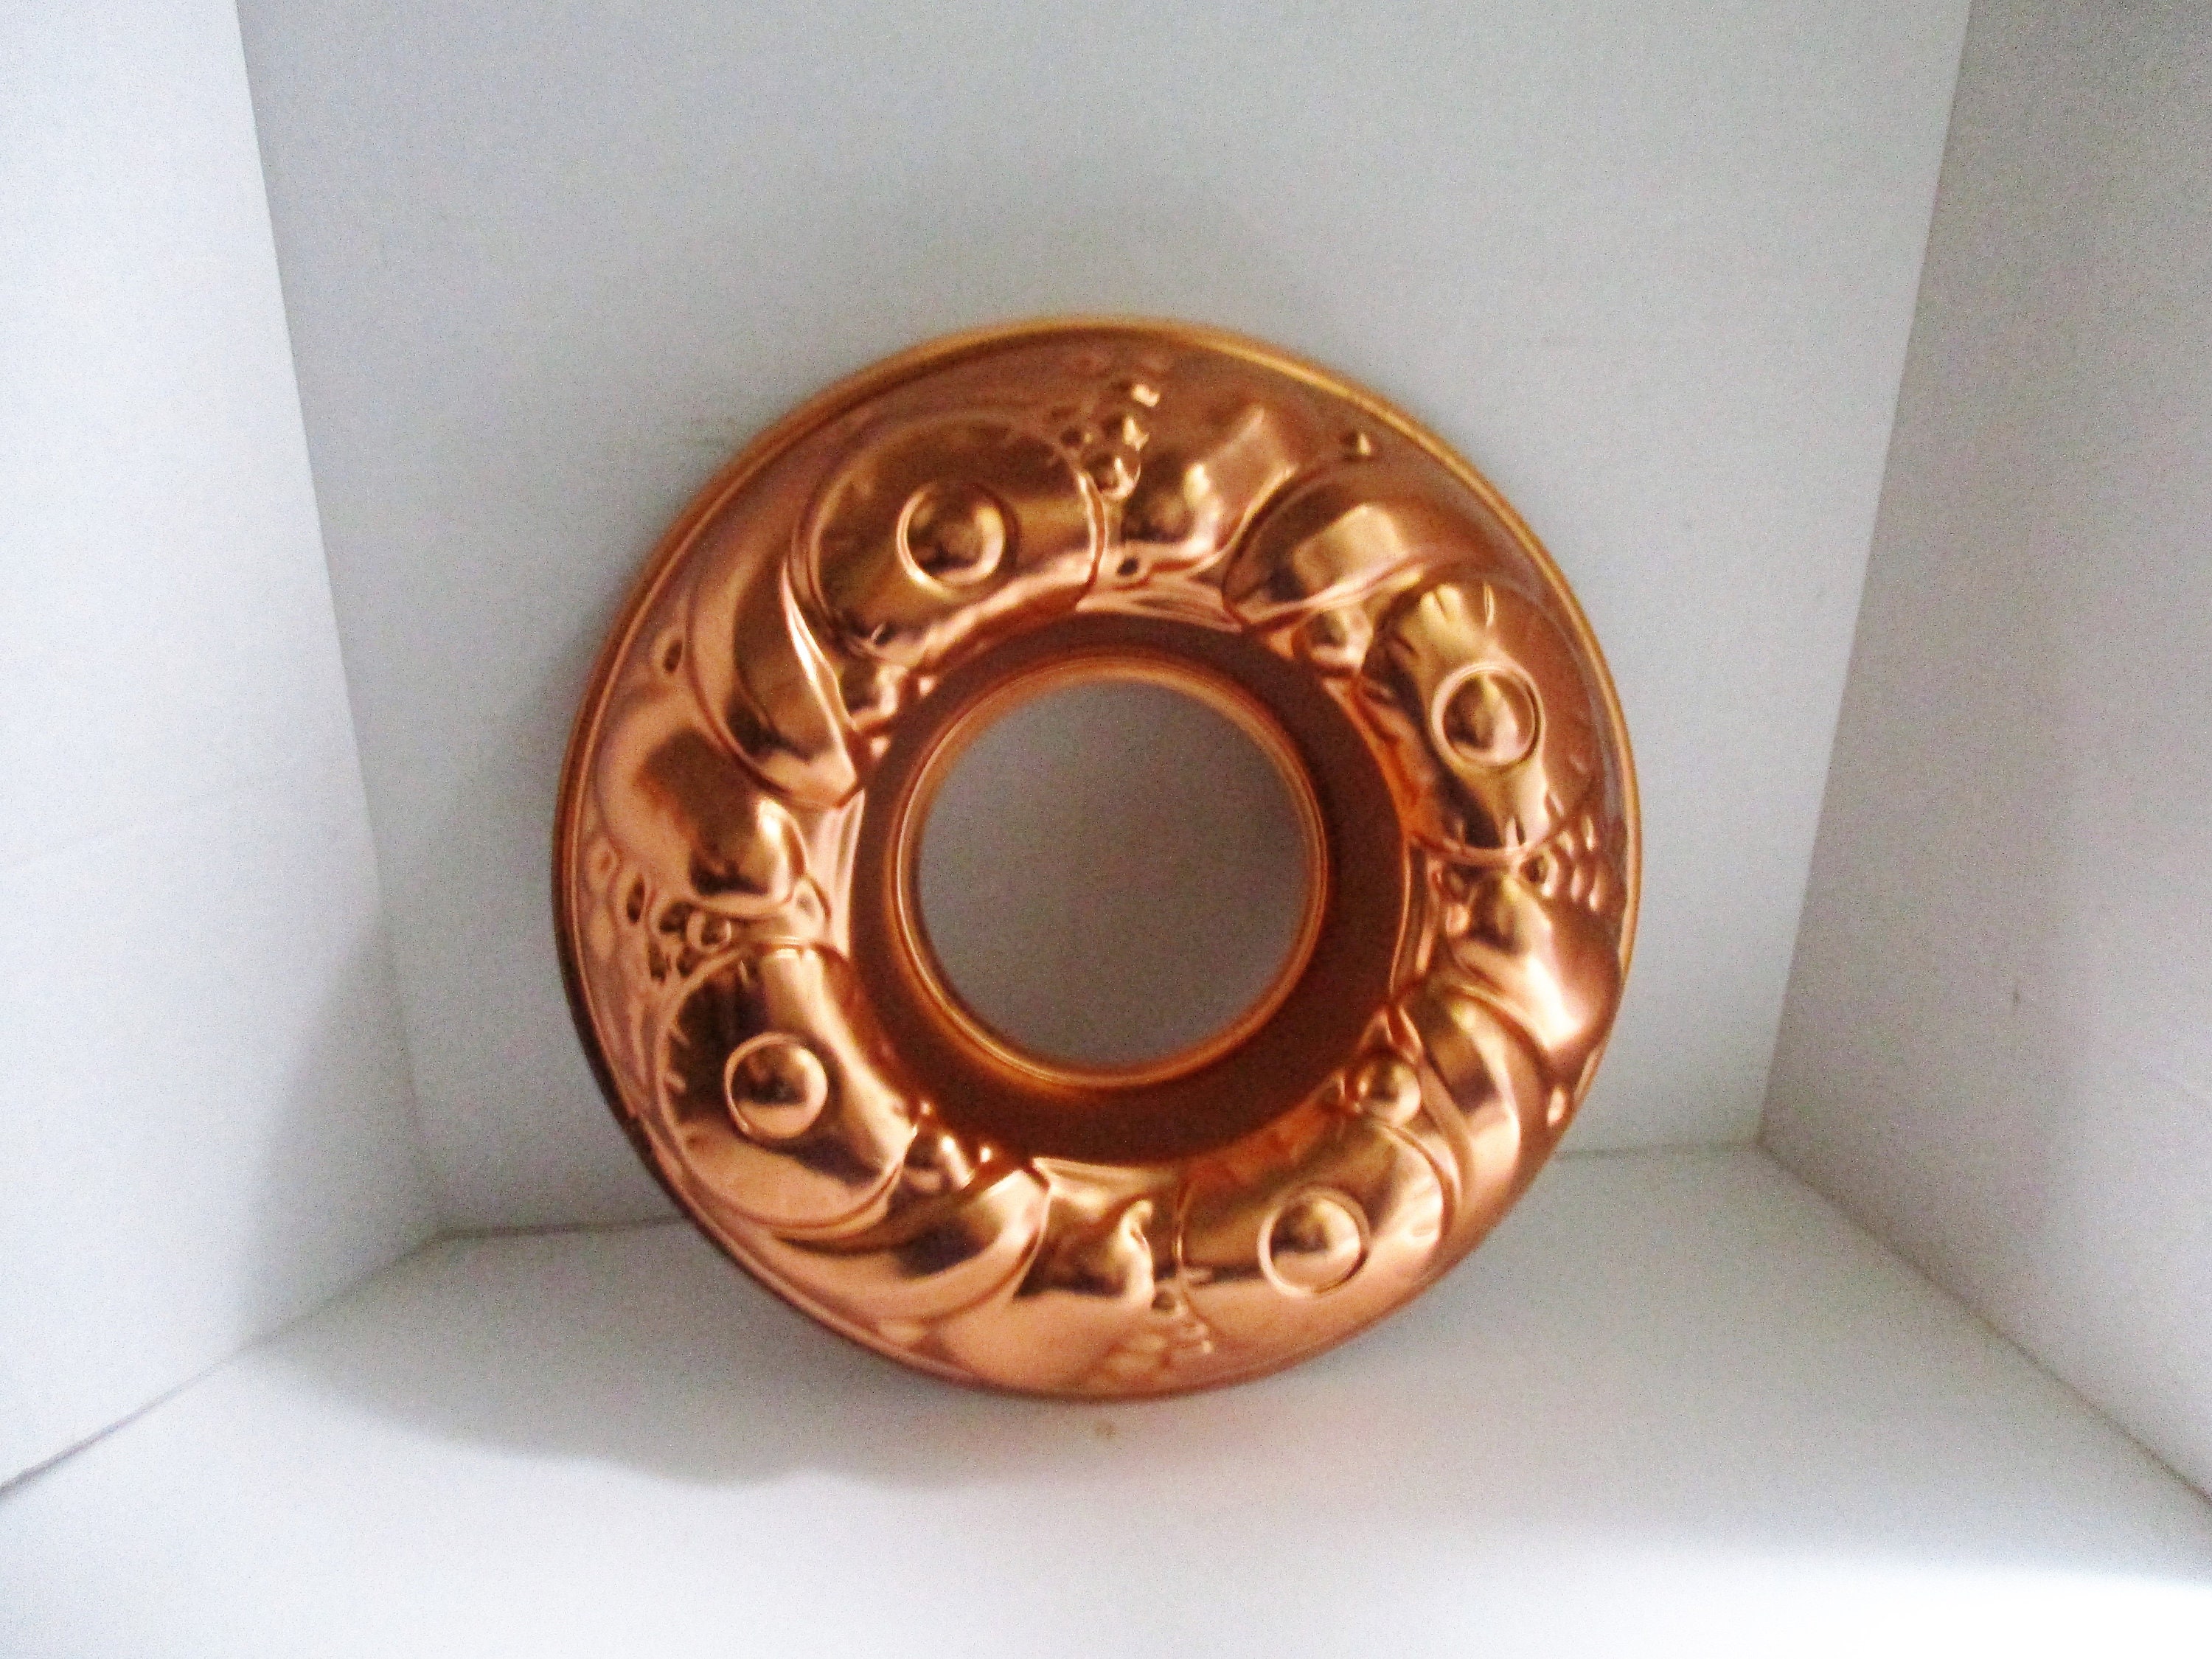 Round Cake Mold/Pastry Ring, S/S, Heavy Gauge. (5 inch x 1.75 inch)